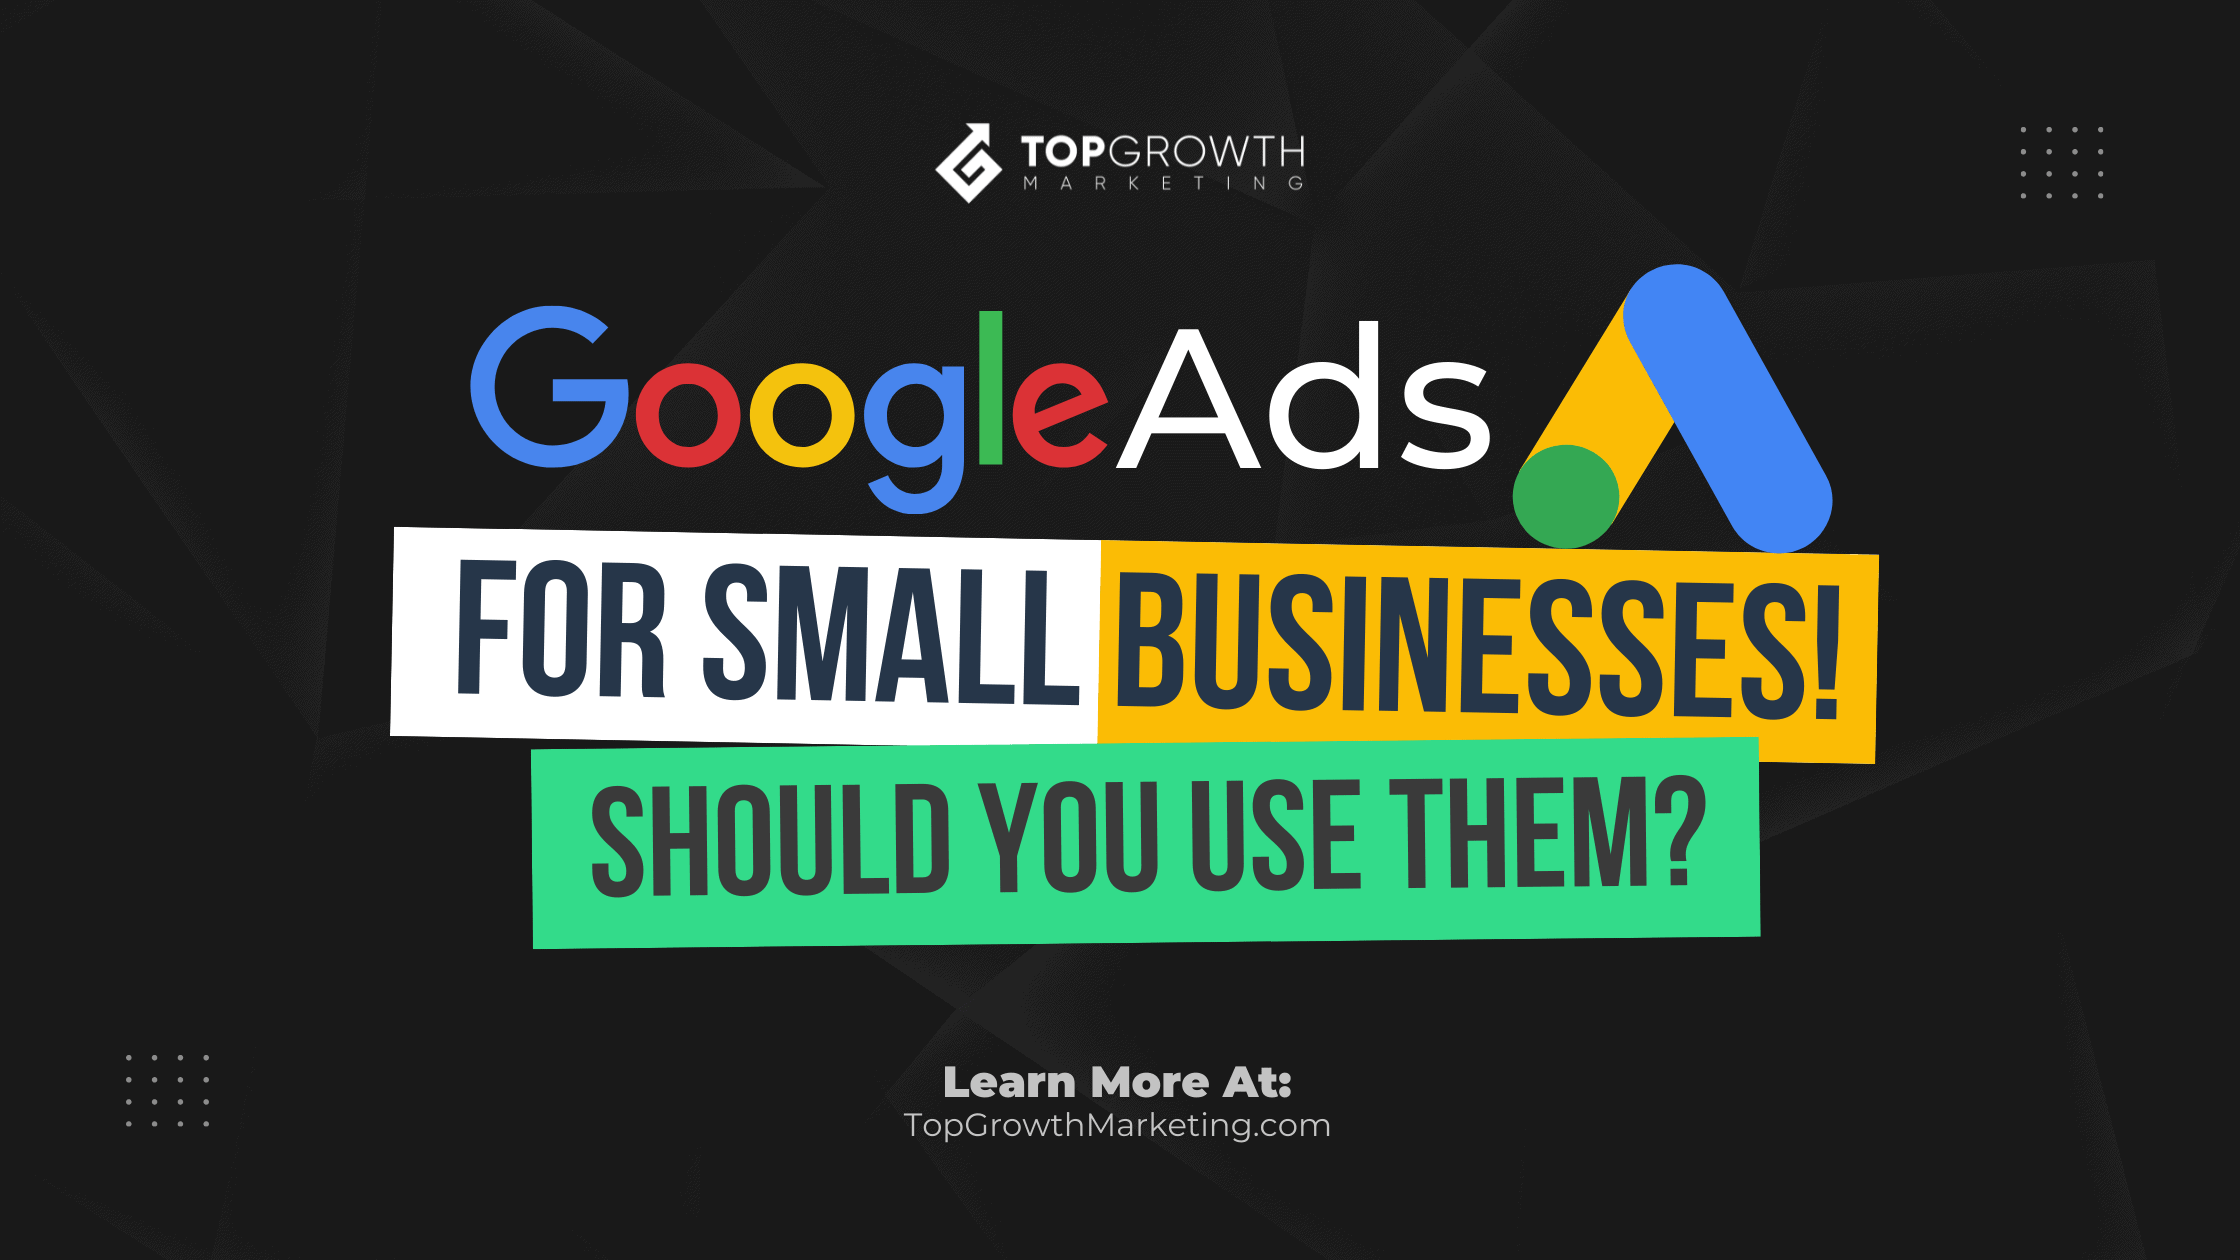 Google Ads For Small Business – Should You Use Them In 2022?